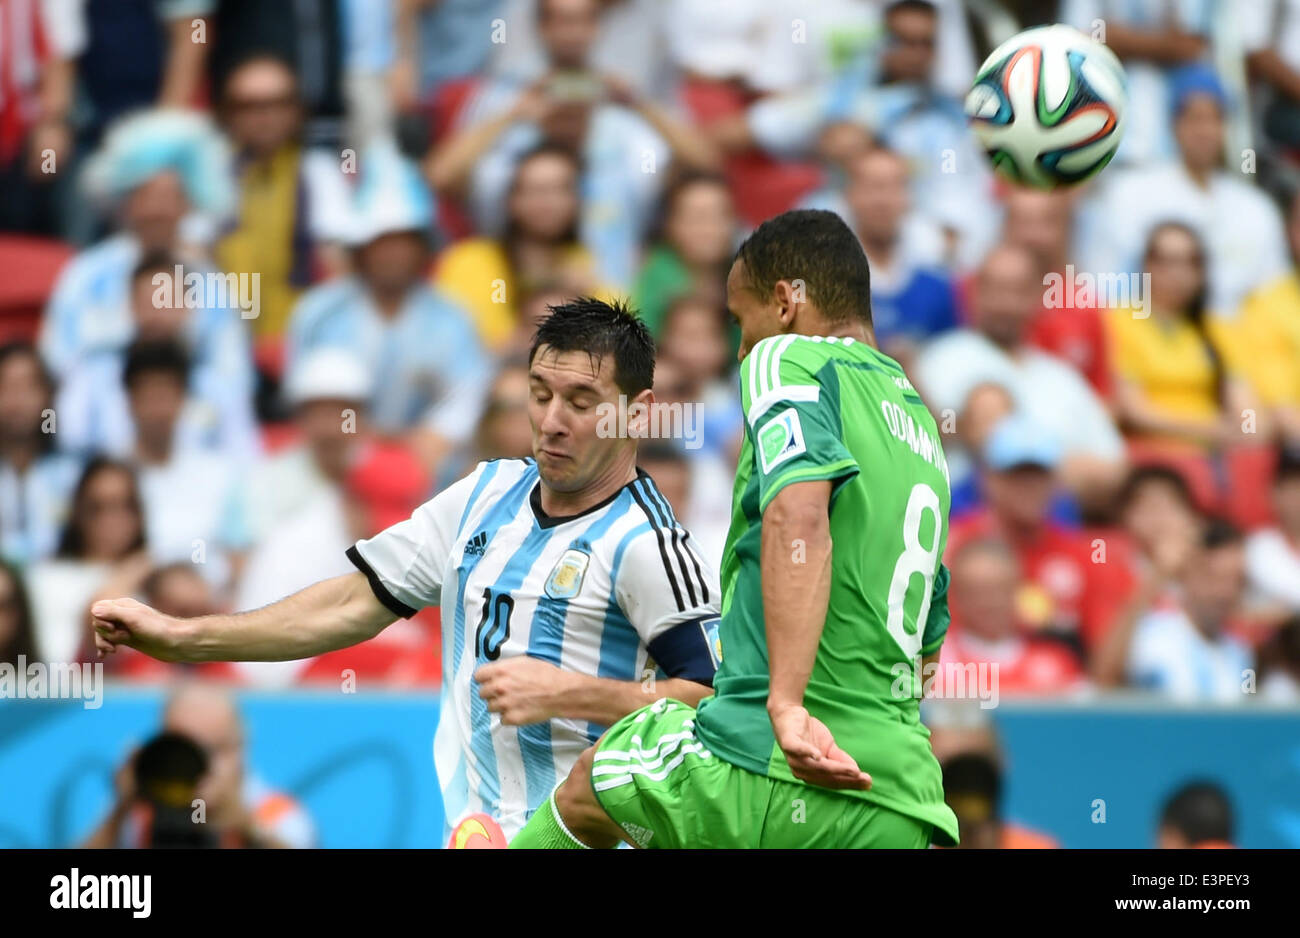 Porto Alegre, Brazil. 25th June, 2014. Argentina's Lionel Messi (L) competes with Nigeria's Peter Osaze Odemwingie during a Group F match between Nigeria and Argentina of 2014 FIFA World Cup at the Estadio Beira-Rio Stadium in Porto Alegre, Brazil, on June 25, 2014. Argentina won 3-2 over Nigeria on Wednesday. © Li Ga/Xinhua/Alamy Live News Stock Photo